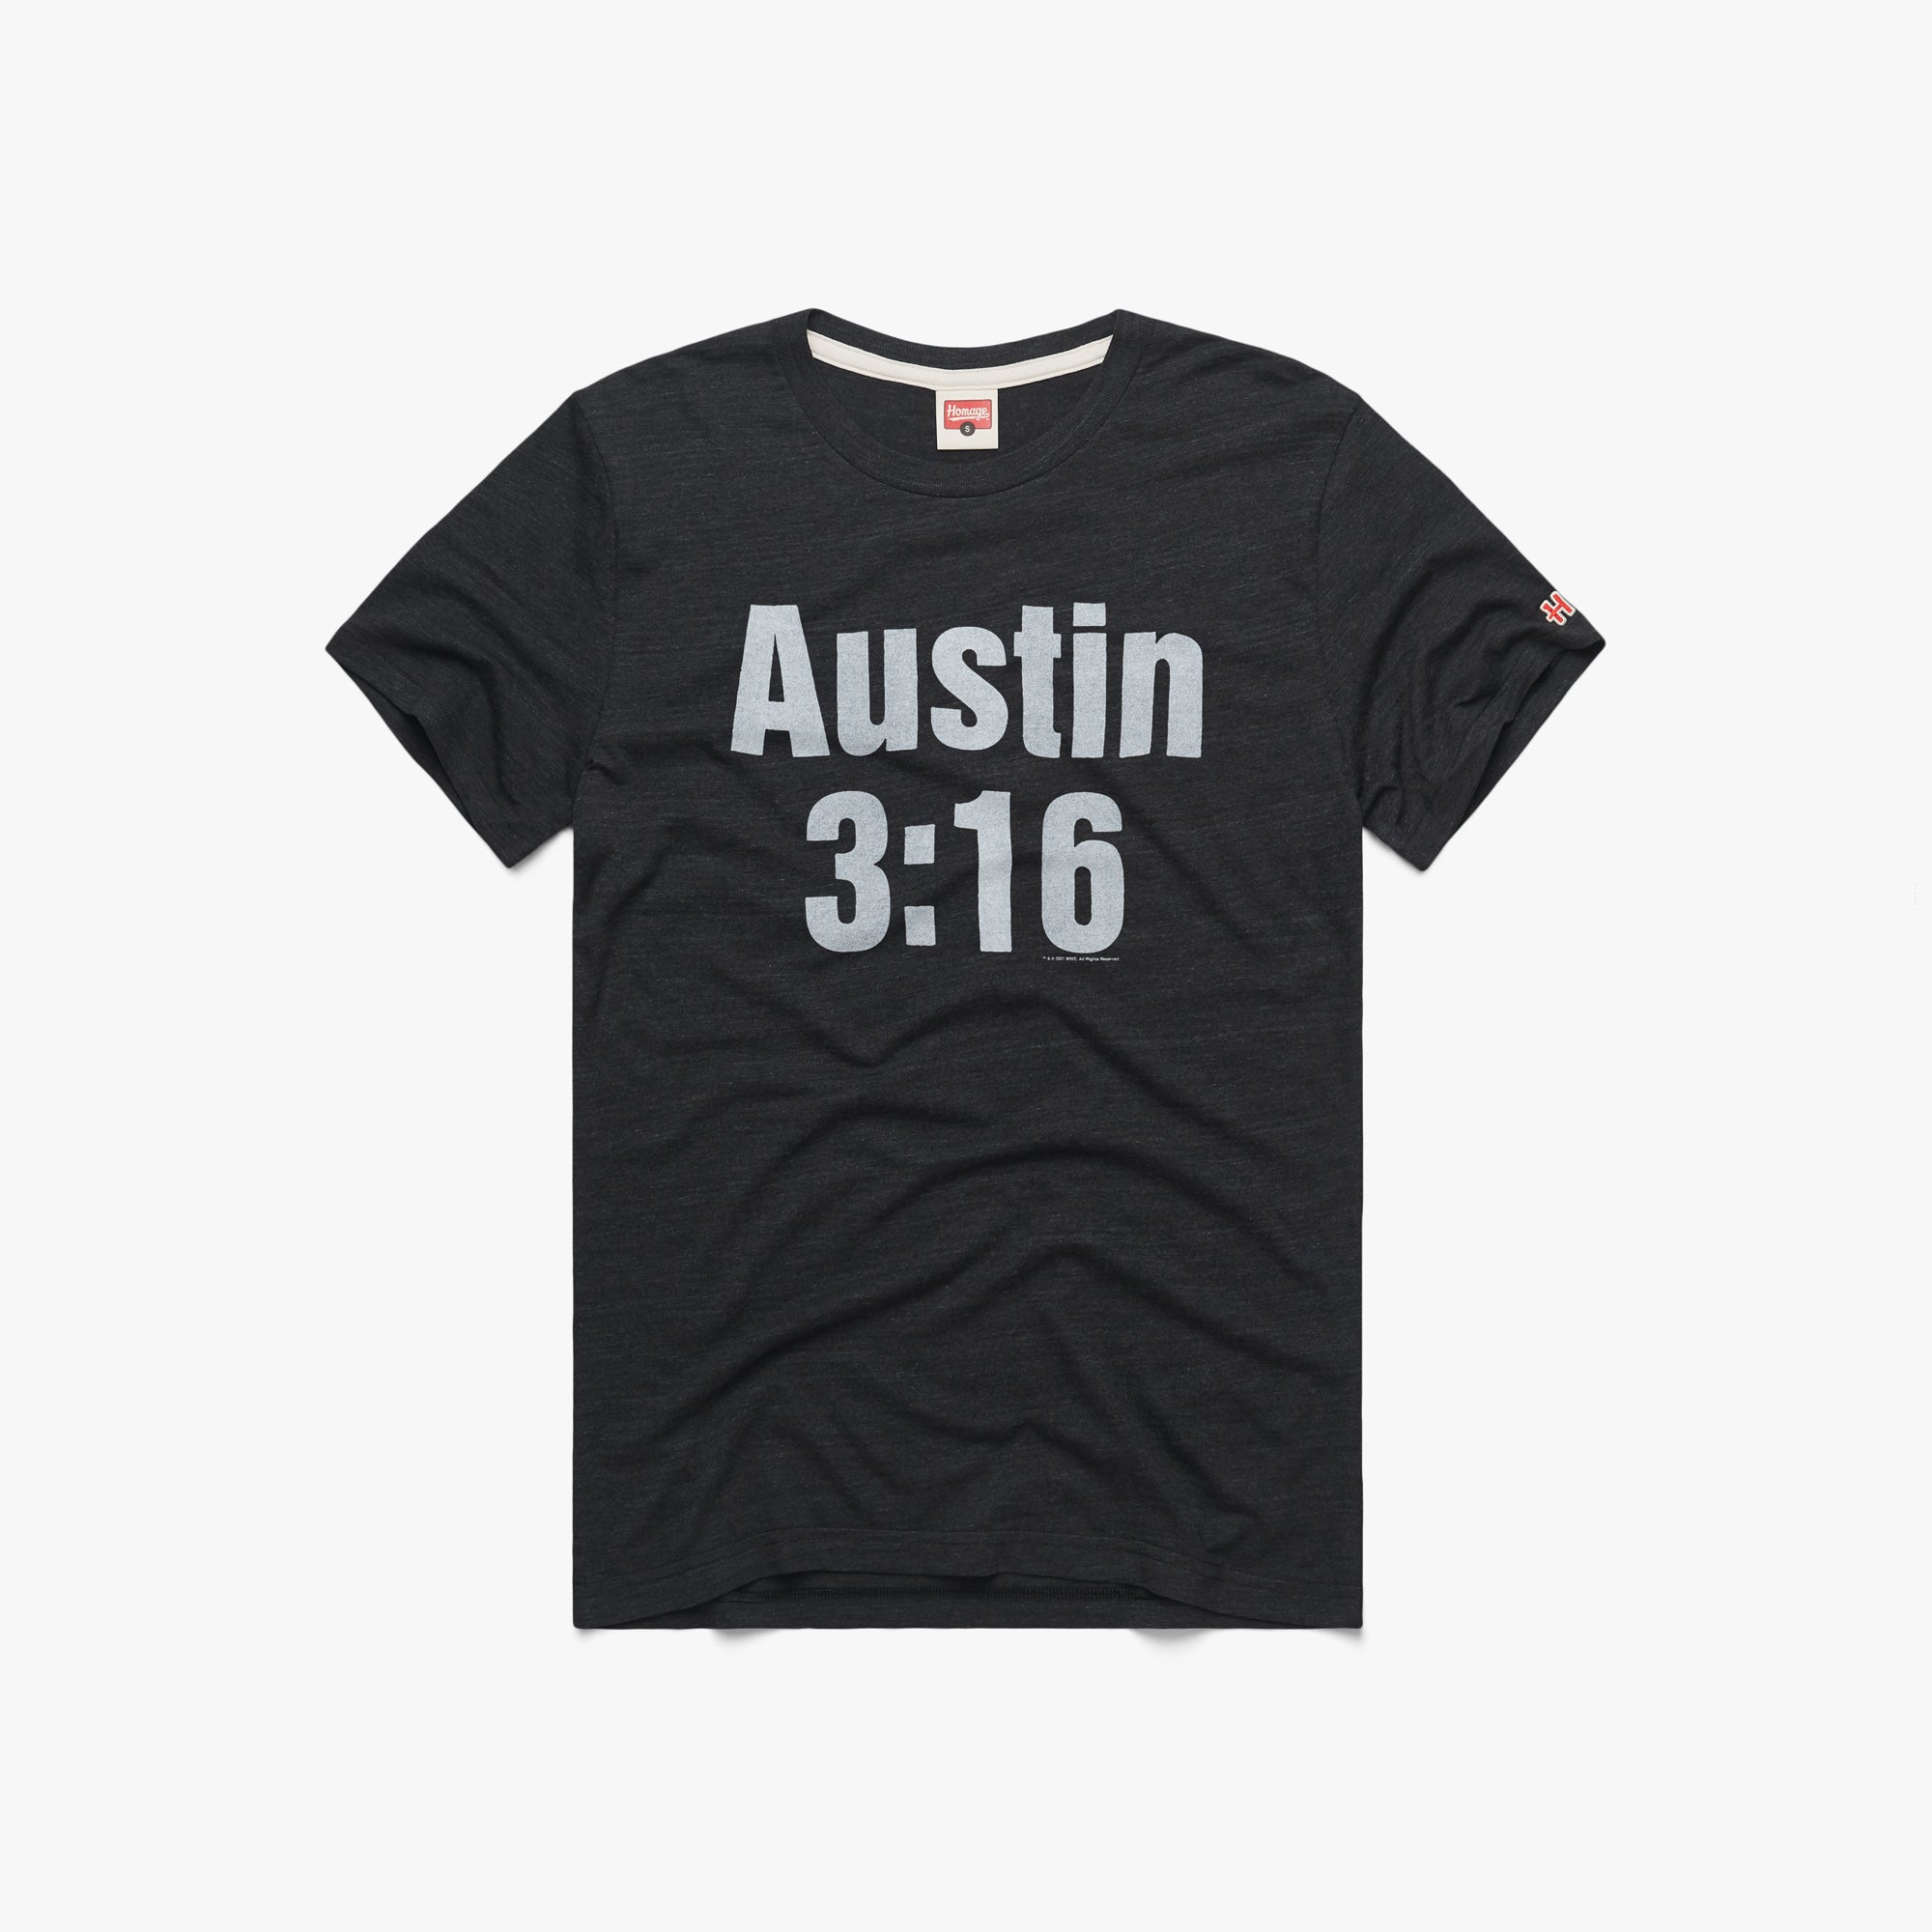 Austin 3:16 T-Shirt from Homage | Grey | Vintage WWE Apparel from Homage.